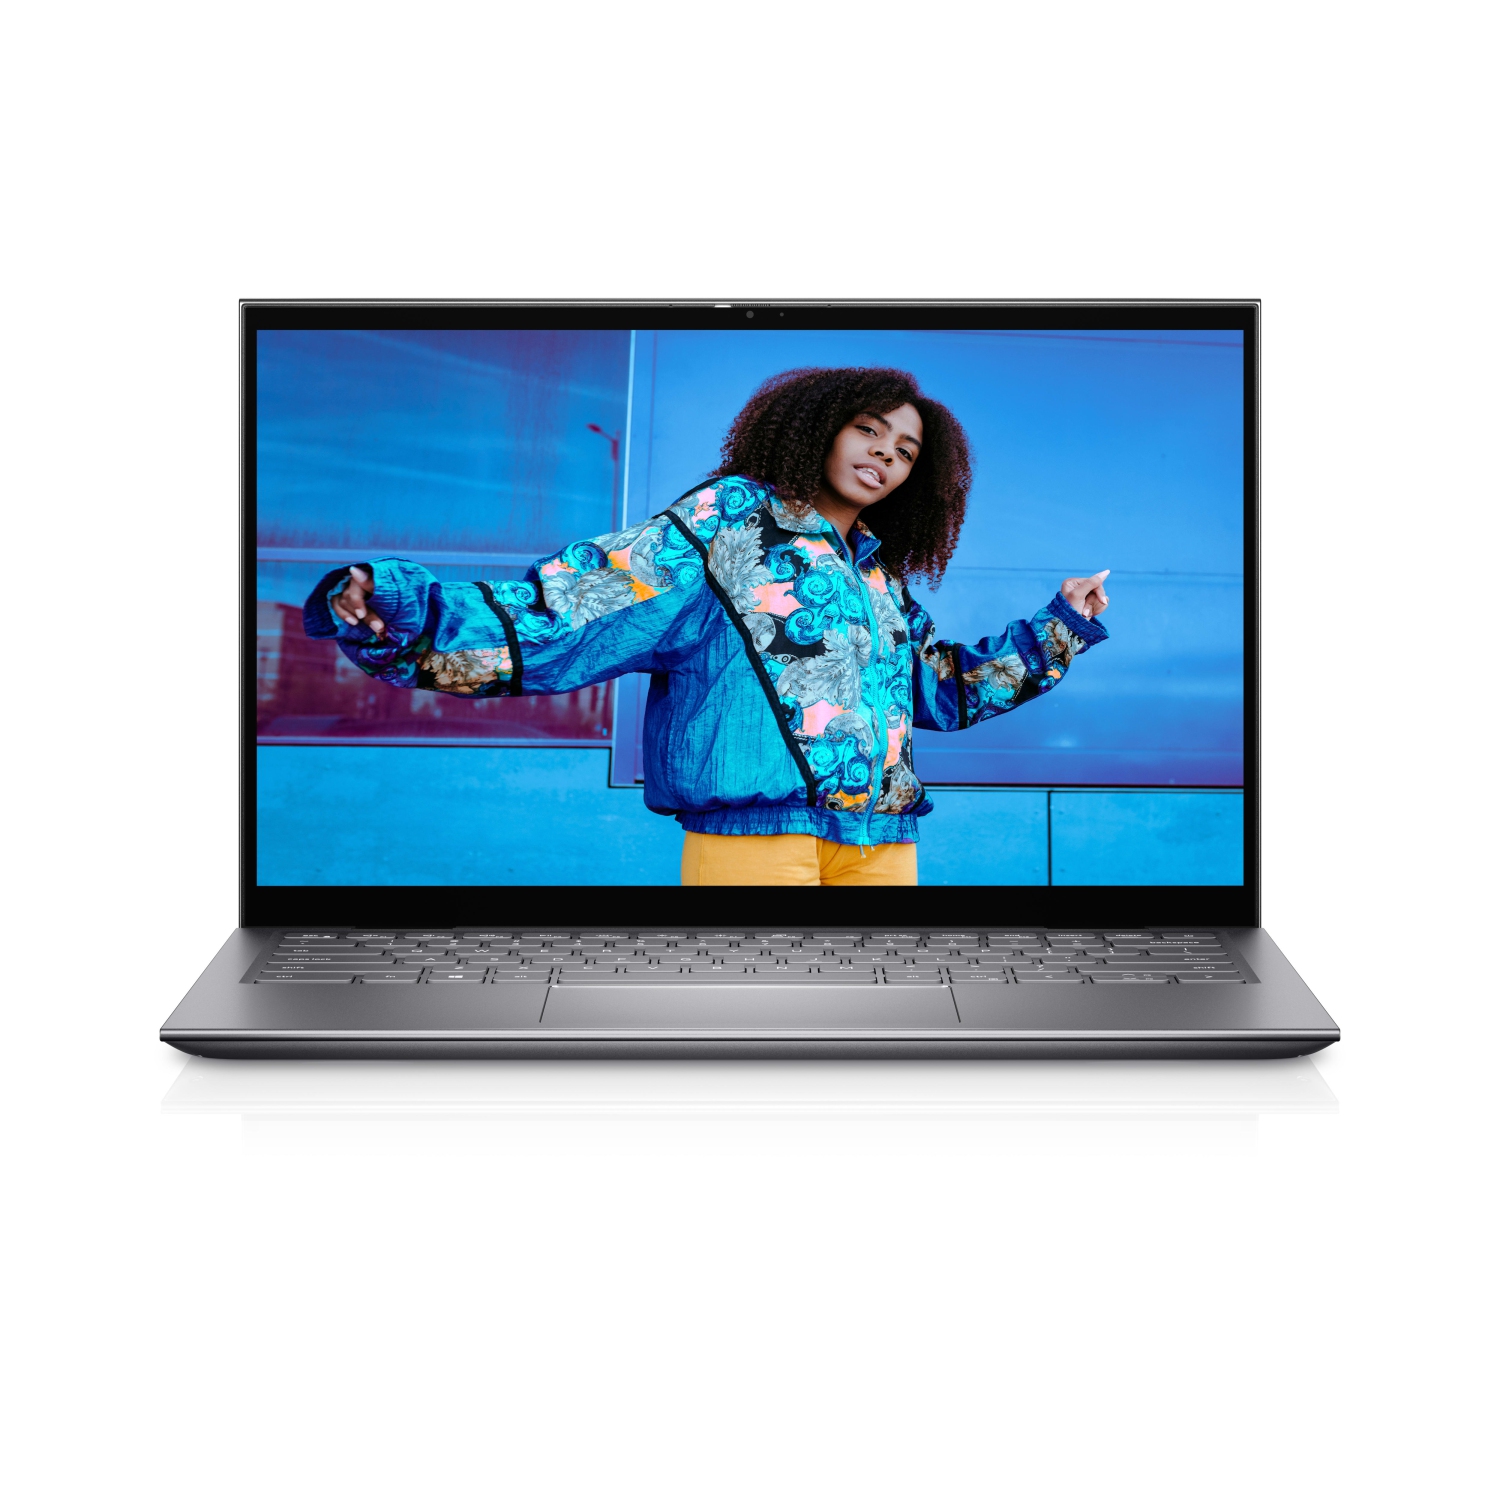 Refurbished (Excellent) – Dell Inspiron 5410 2-in-1 (2021) | 14" FHD Touch | Core i5 - 8TB SSD - 16GB RAM | 4 Cores @ 4.5 GHz - 11th Gen CPU